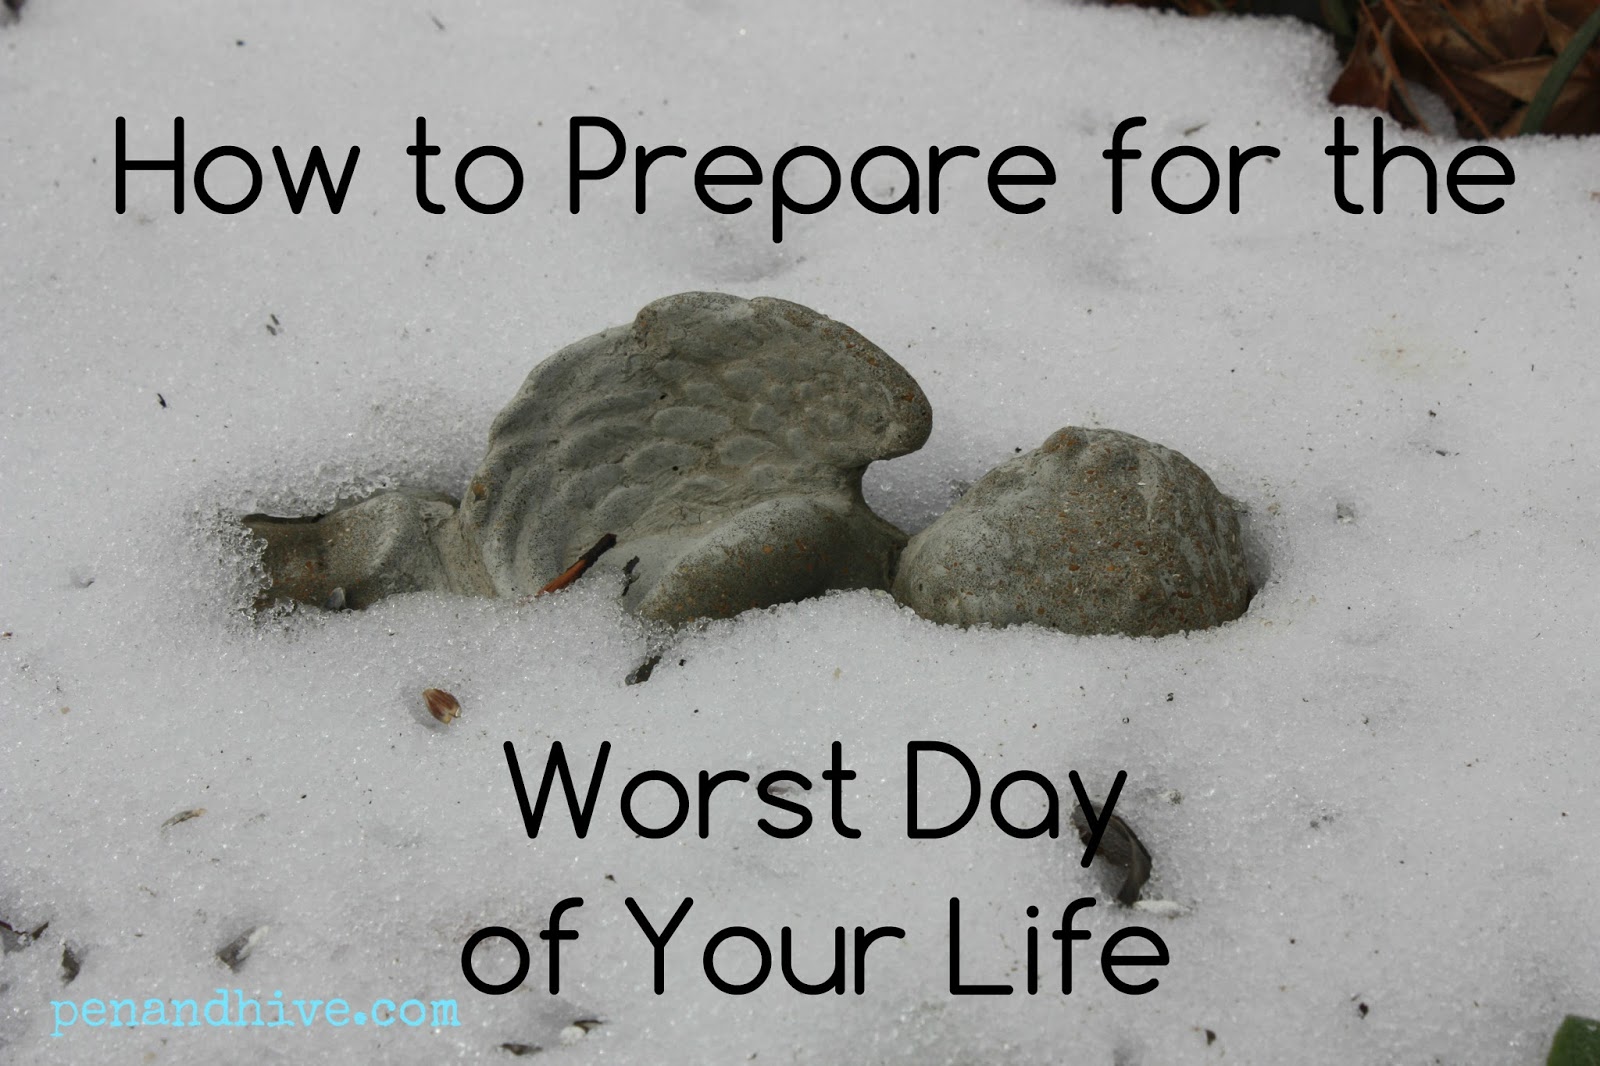 pen-hive-how-to-prepare-for-the-worst-day-of-your-life-winter-is-coming